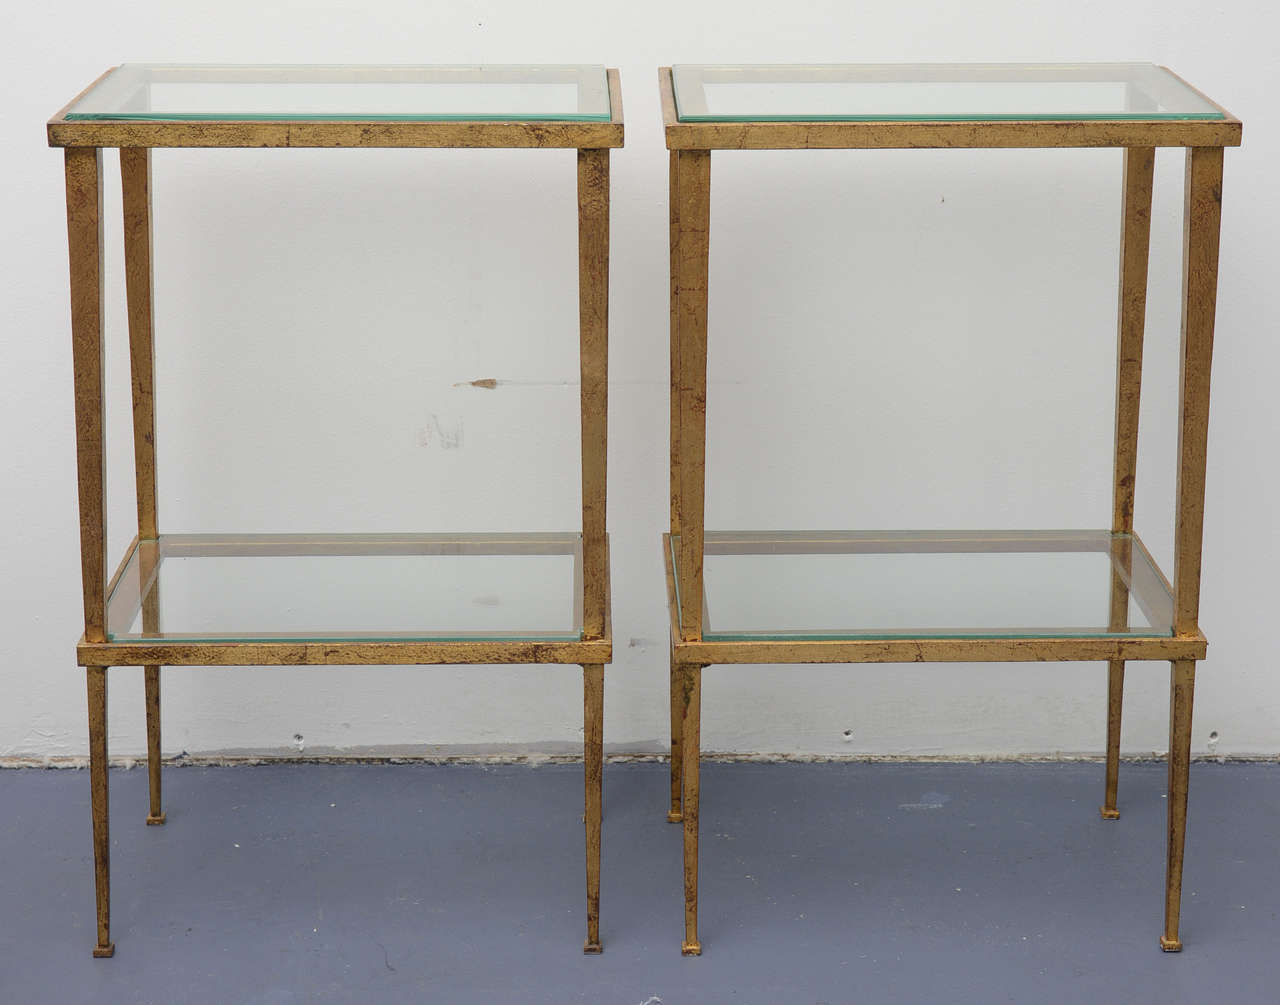 Hammered and gold leaves iron small side tables by Ramsay.
From the years 1940. Two glass tops,
Extremely delicate and elegant (jewelries pieces in a house).